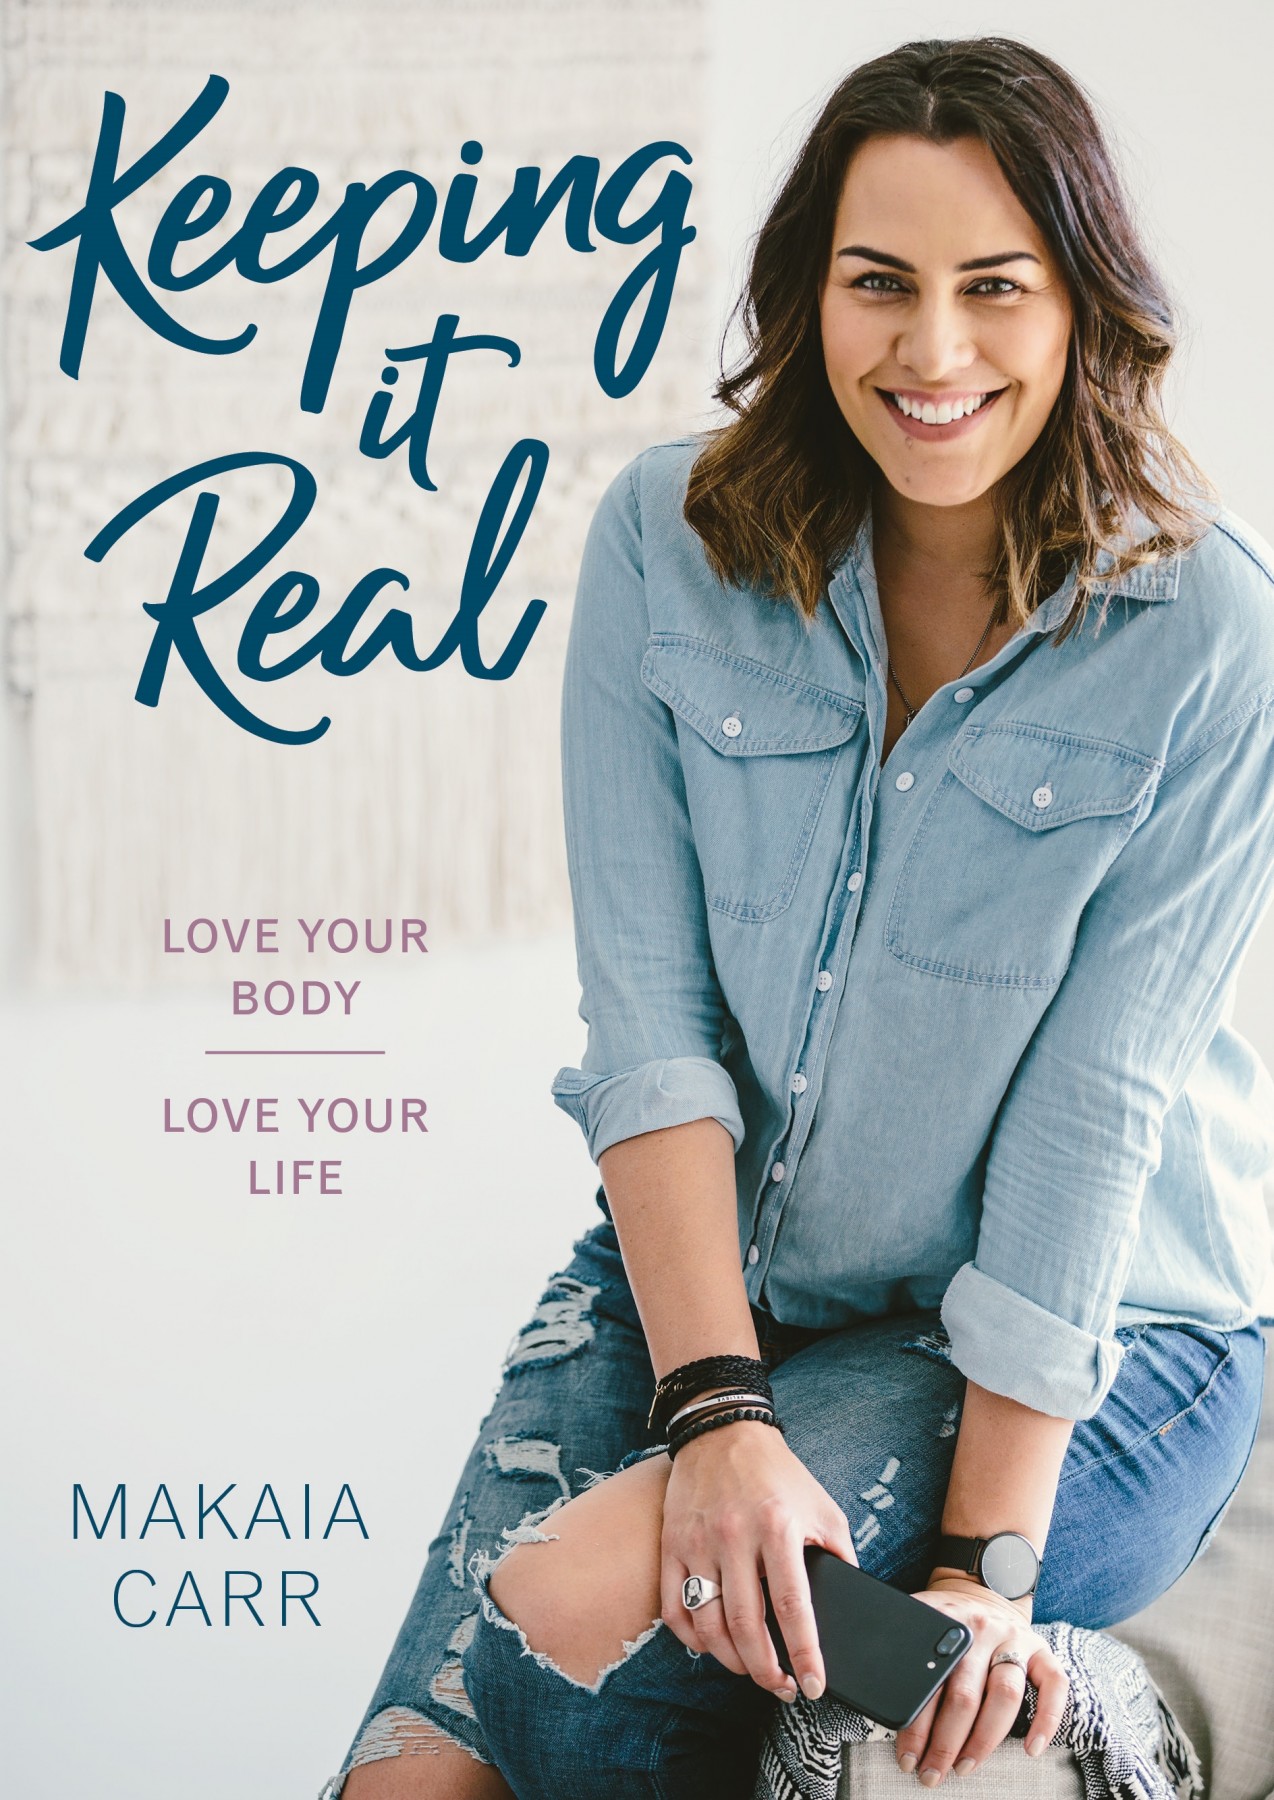 Keeping it real: Love your body, love your life